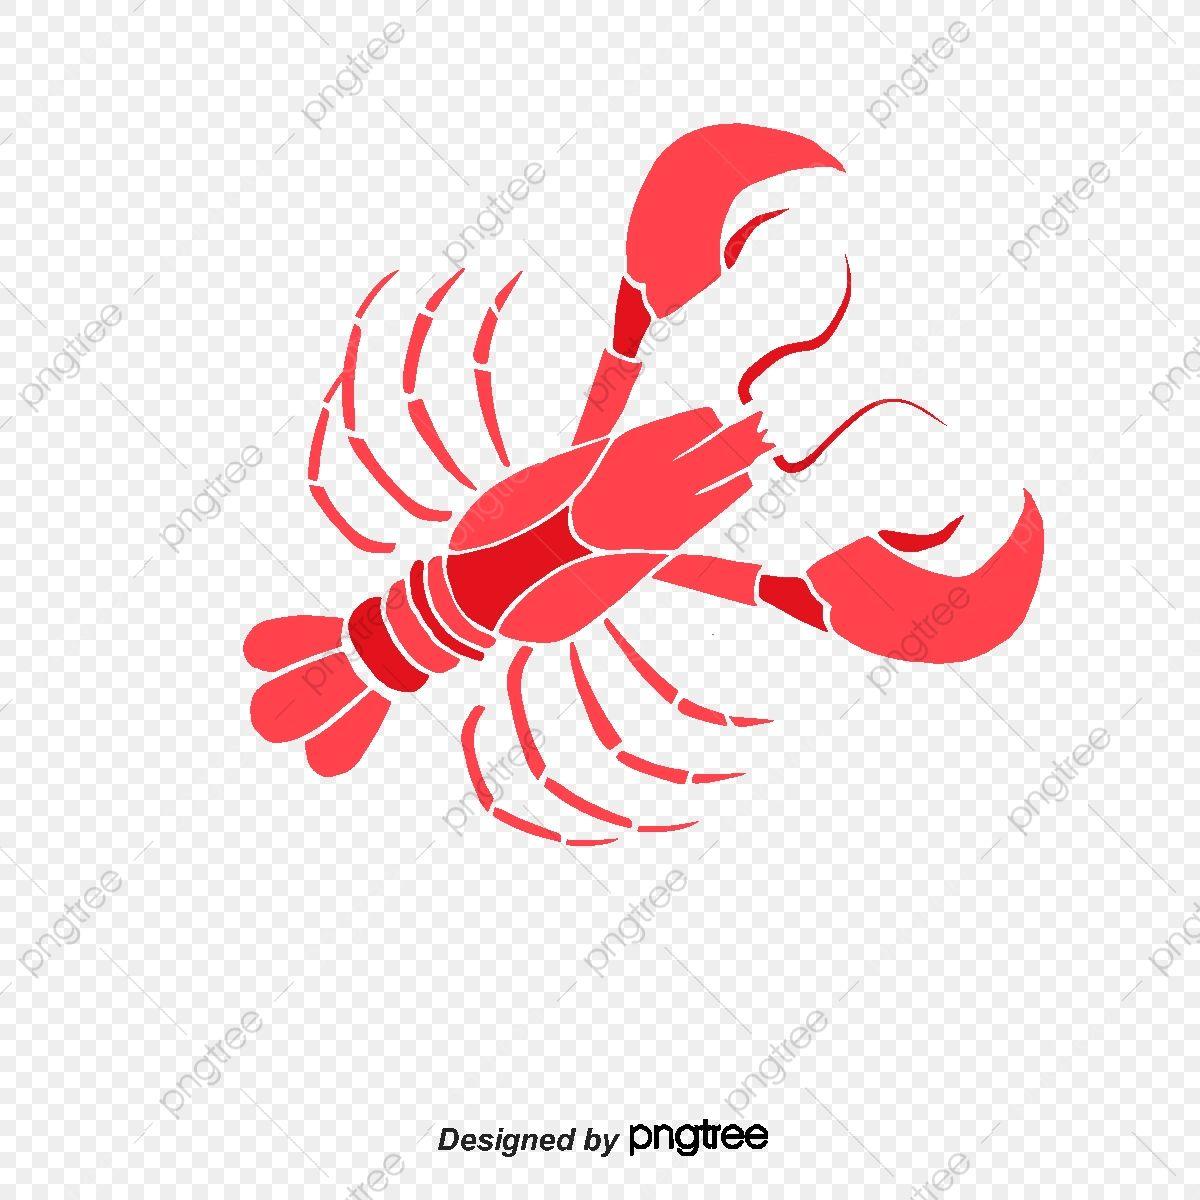 Crayfish Logo - Spicy Crayfish, Vector Png, Lobster, Crayfish PNG and Vector